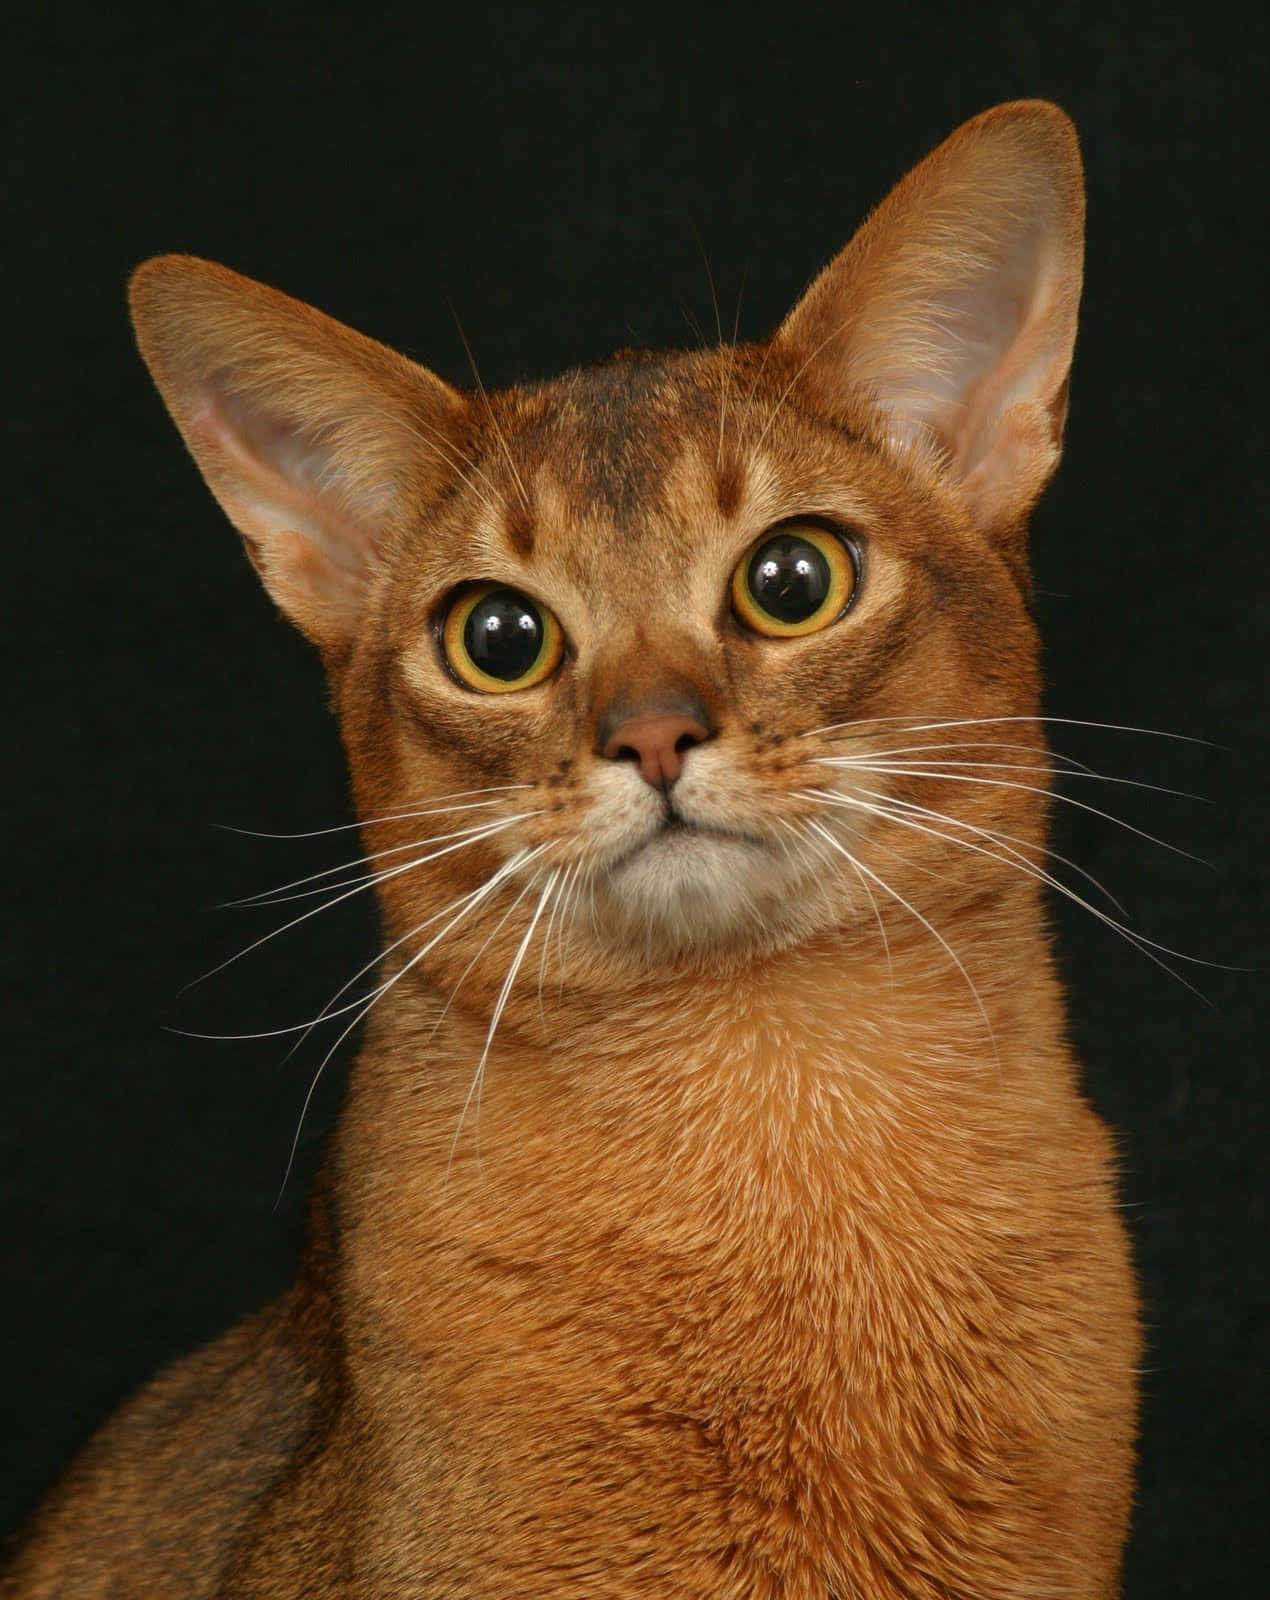 An engaging Abyssinian cat gazing intently at the camera Wallpaper